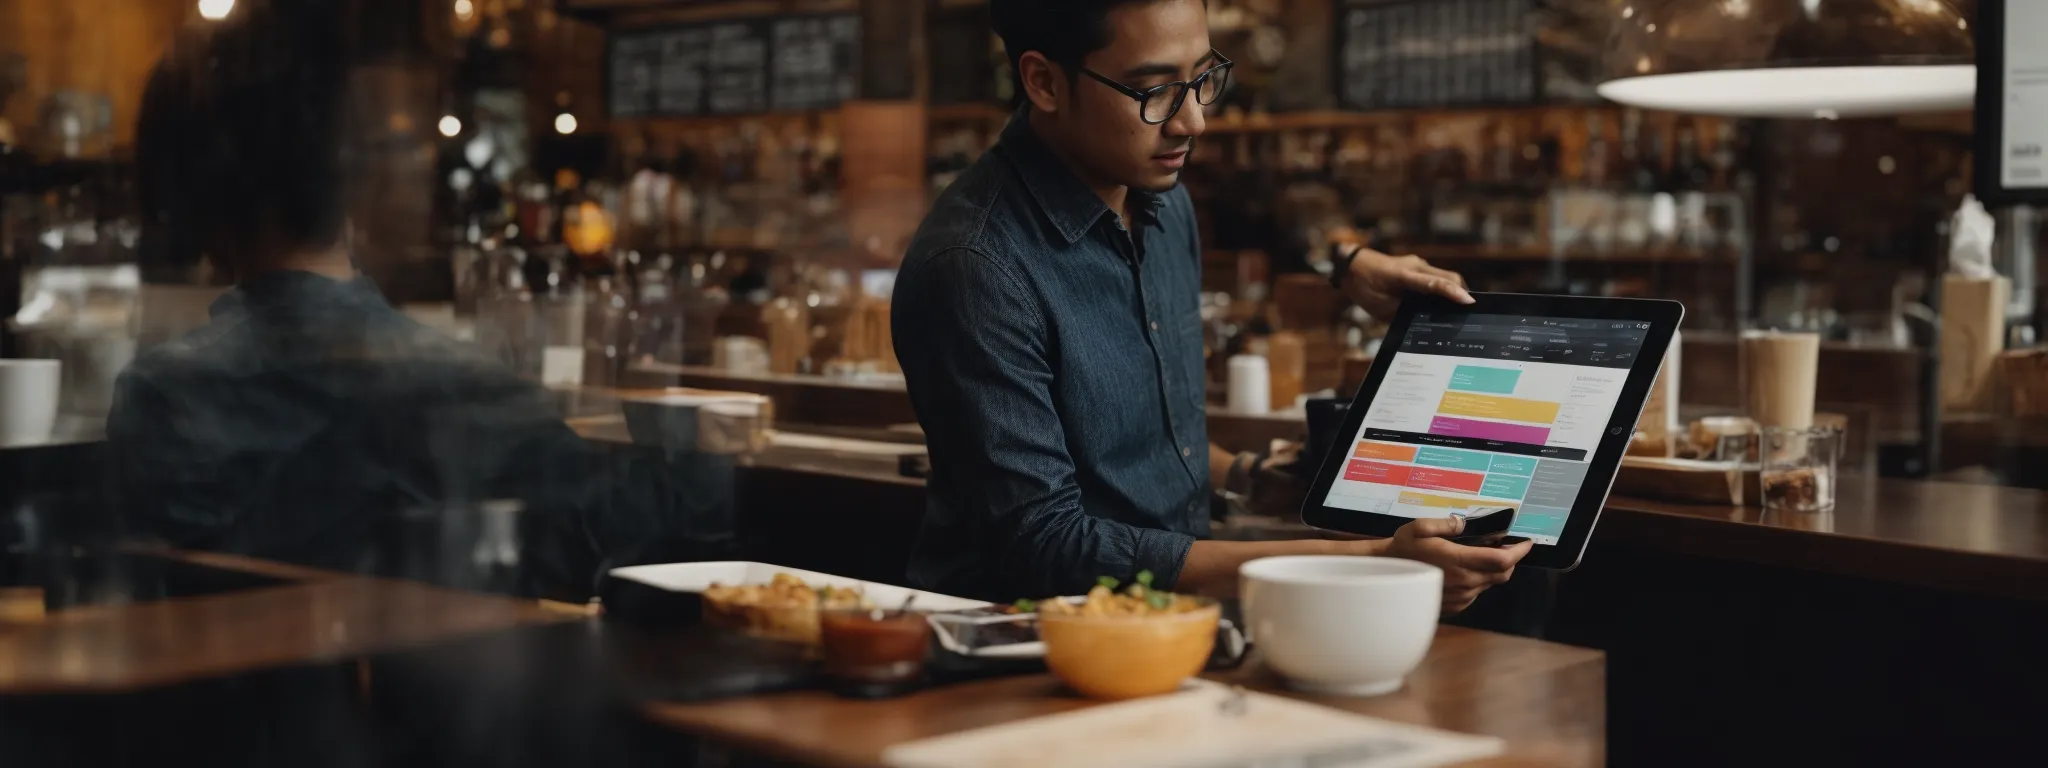 a marketer casually edits a vibrant infographic on a tablet in a bustling cafe.